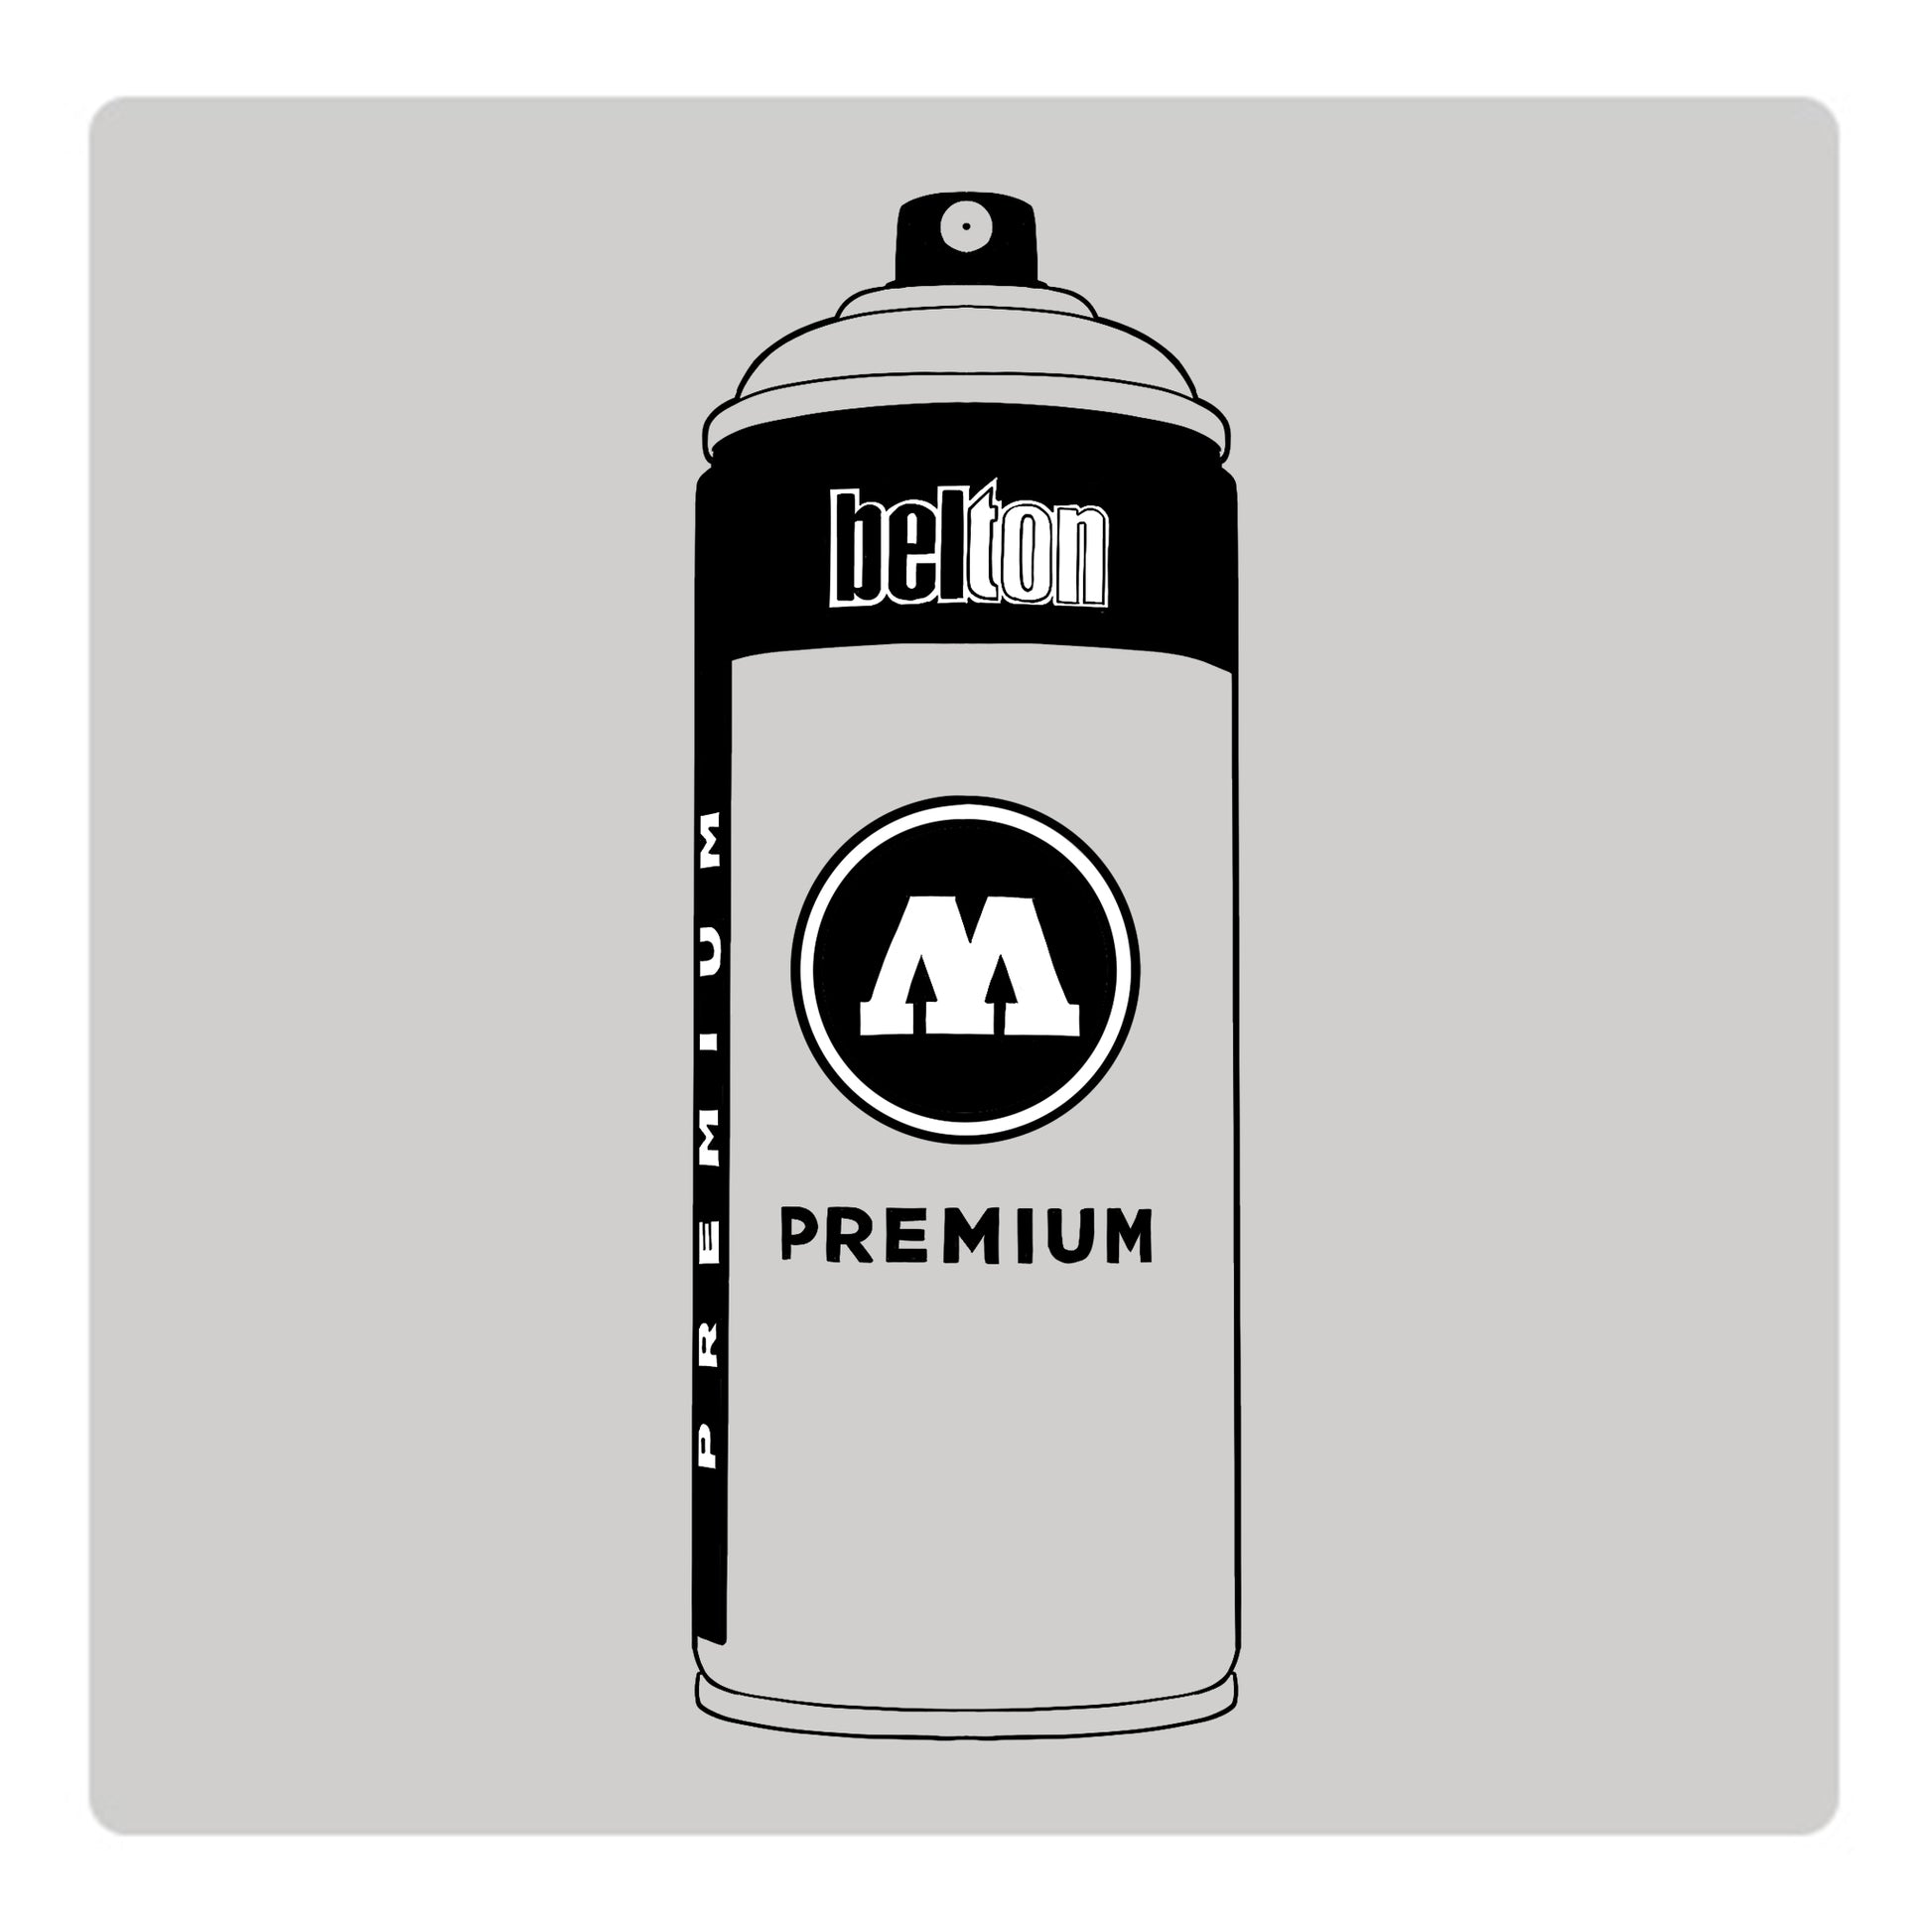 A black outline drawing of a light grey spray paint can with the words "belton","premium" and the letter"M" written on the face in black and white font. The background is a color swatch of the same light grey with a white border